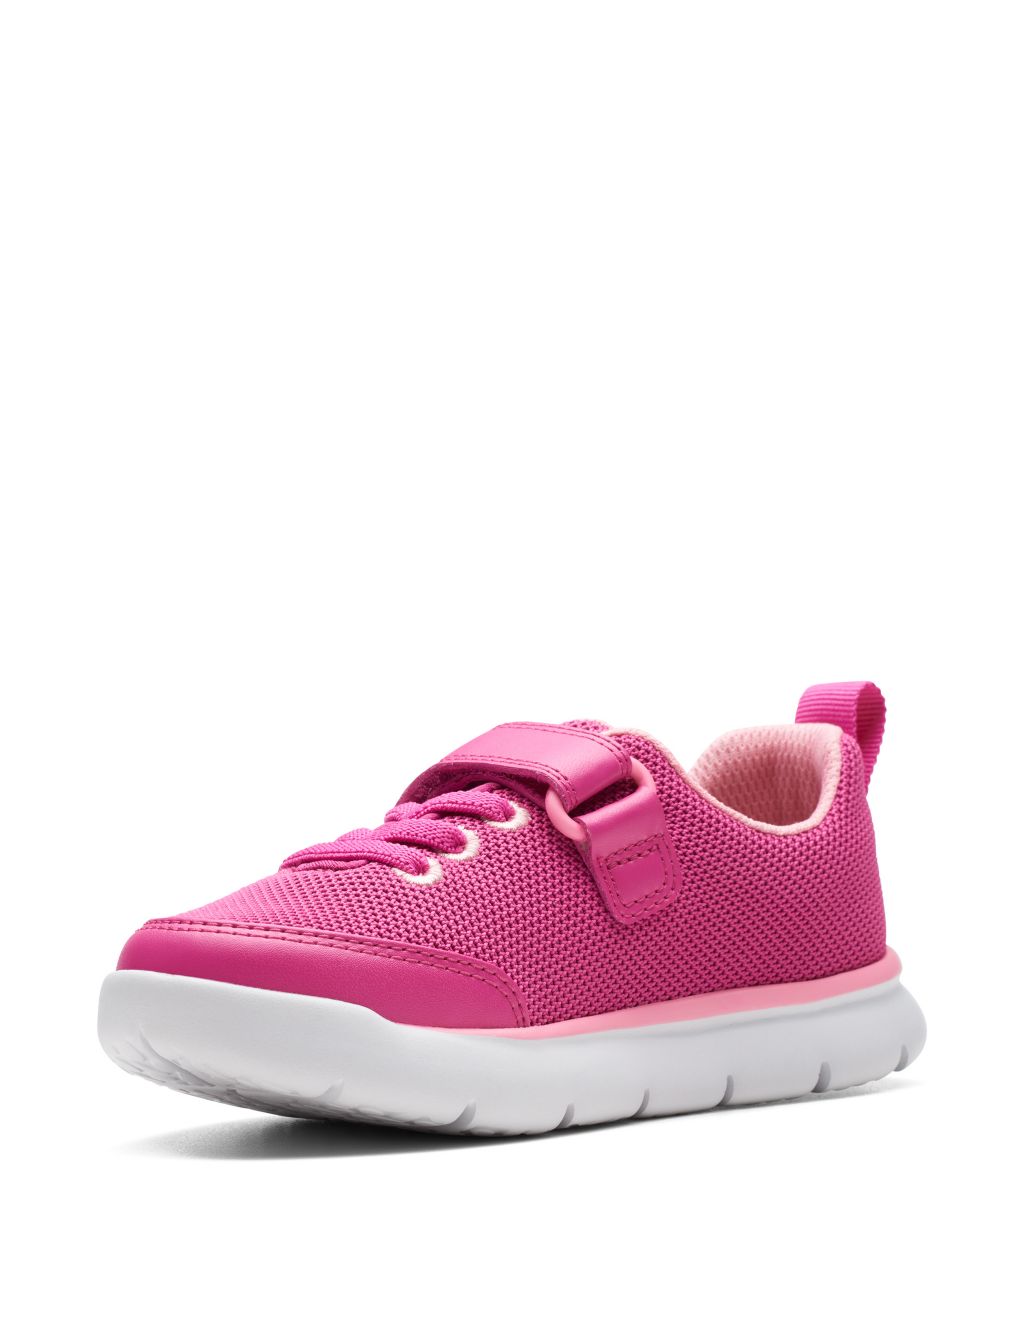 Kids' Riptape Trainers (7 Small - 4 Large) image 3